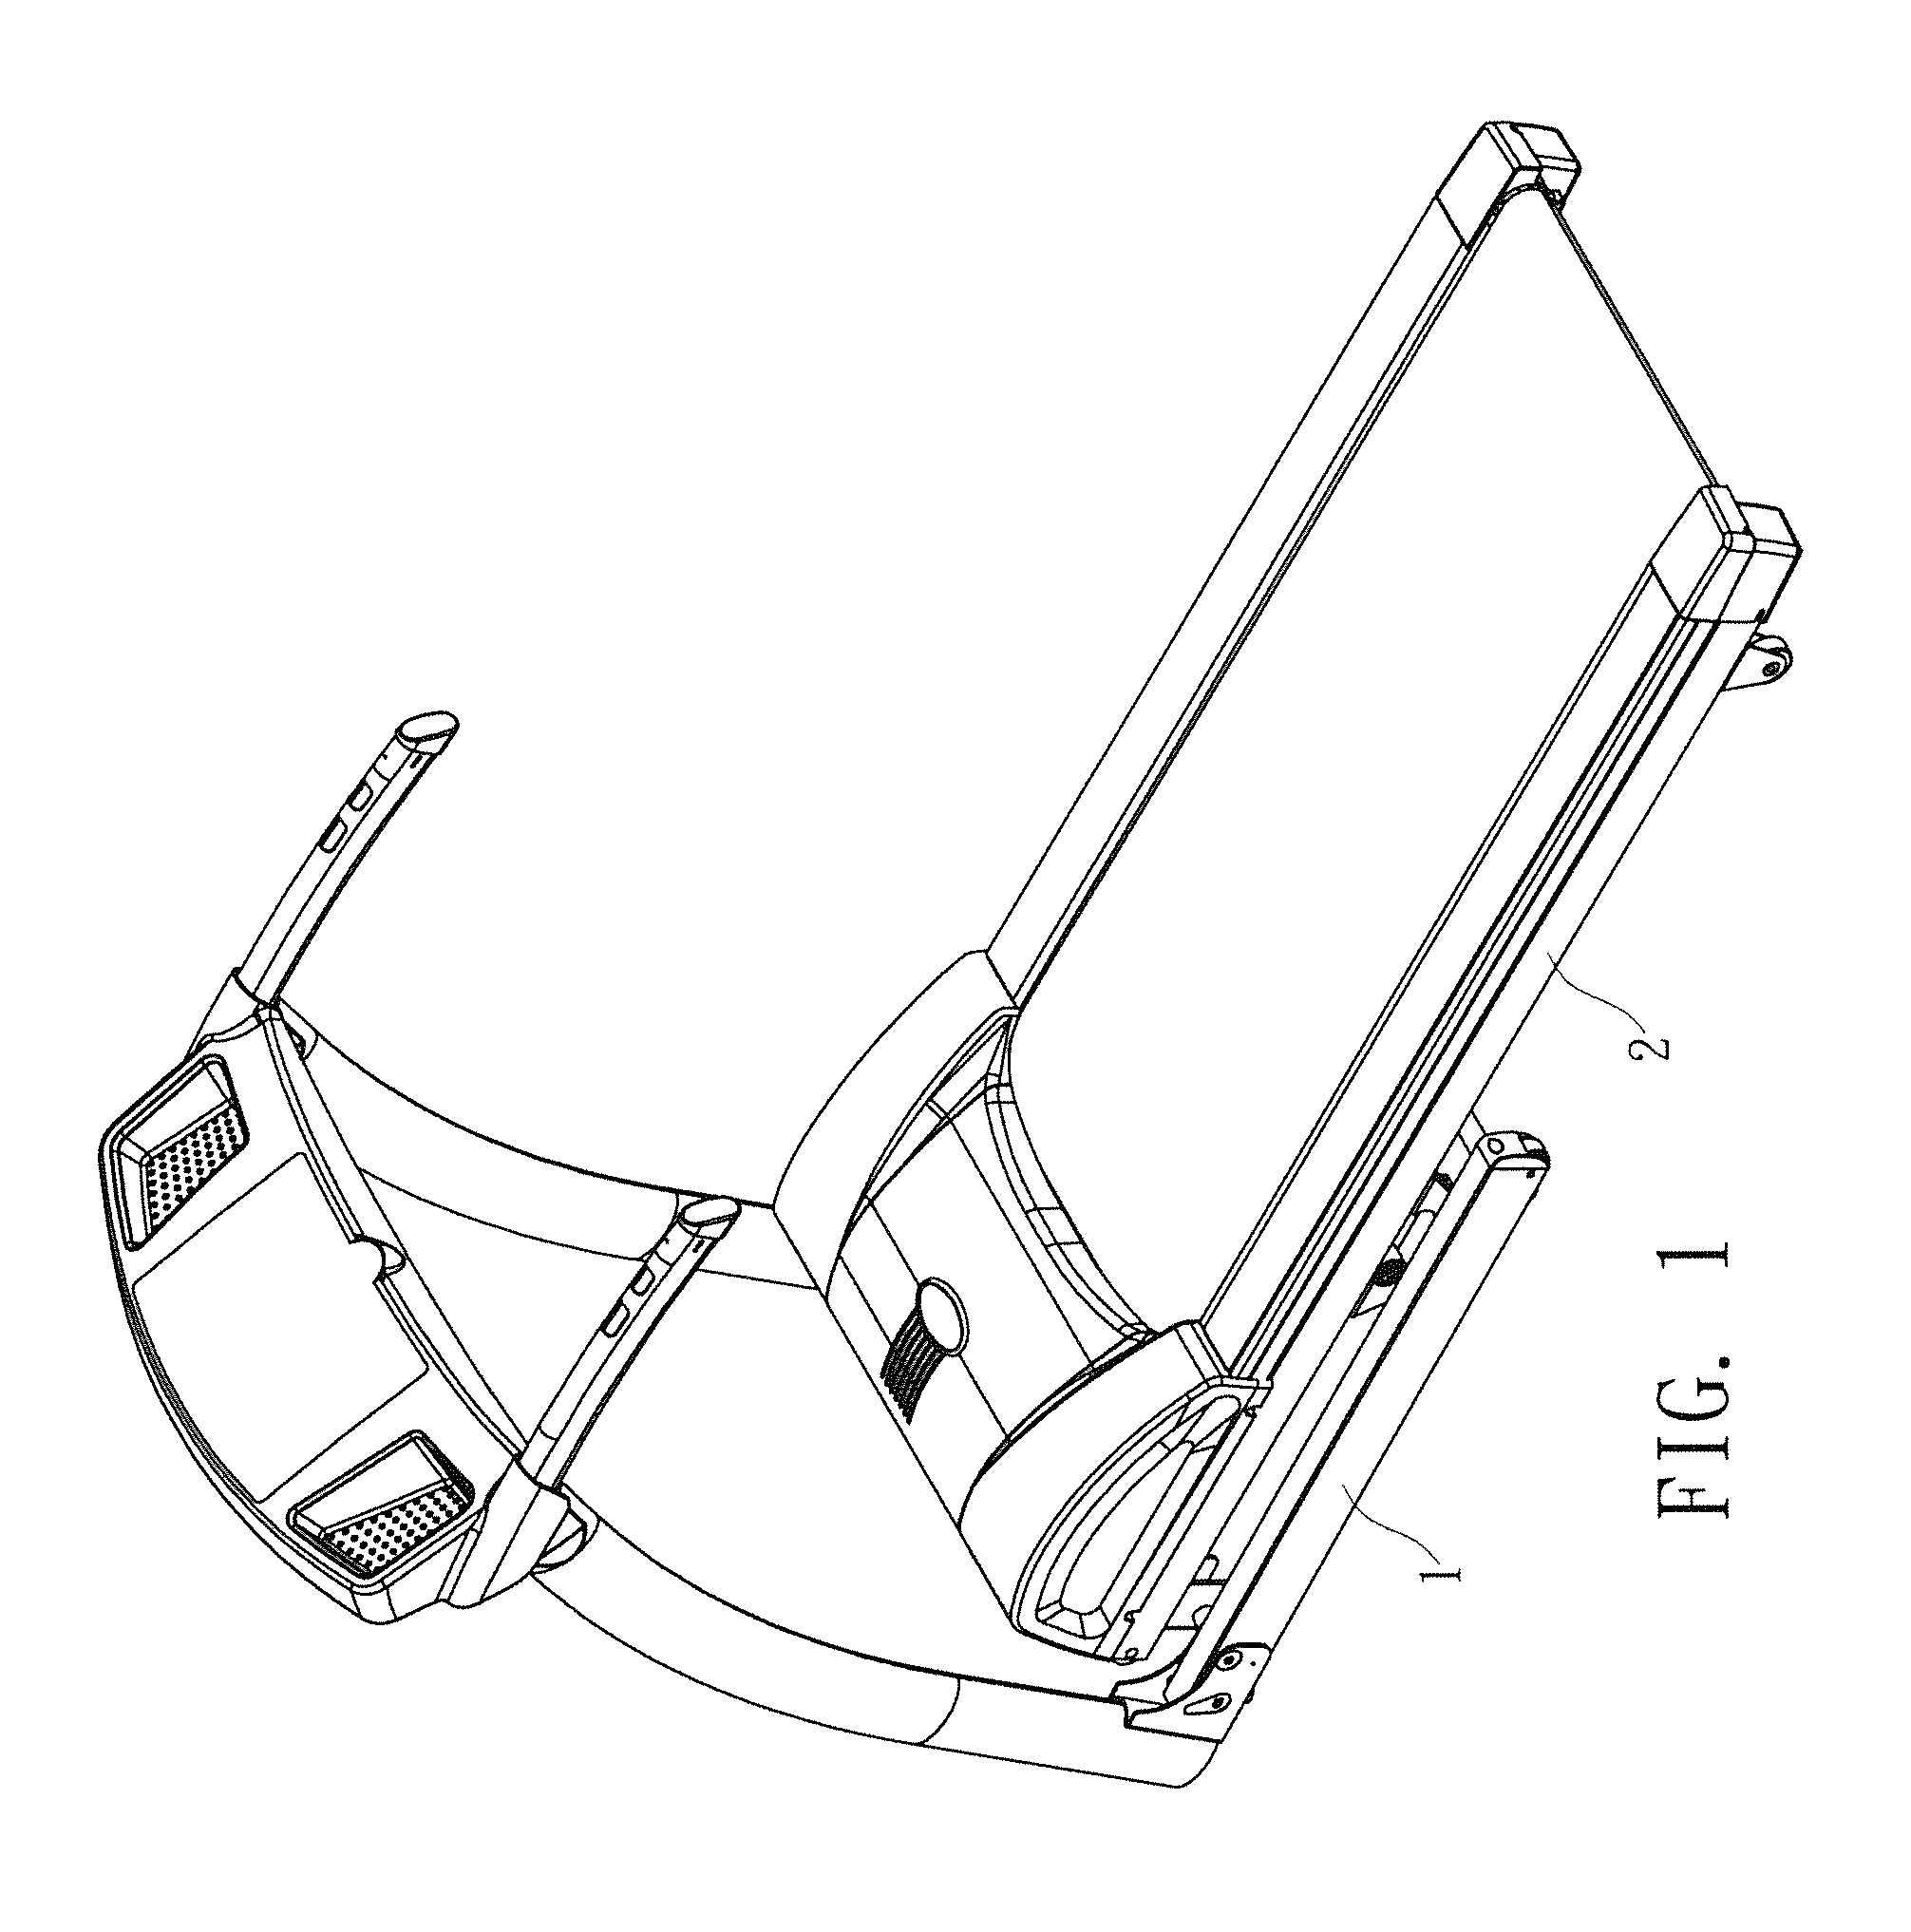 Tilting and folding device for a treadmill